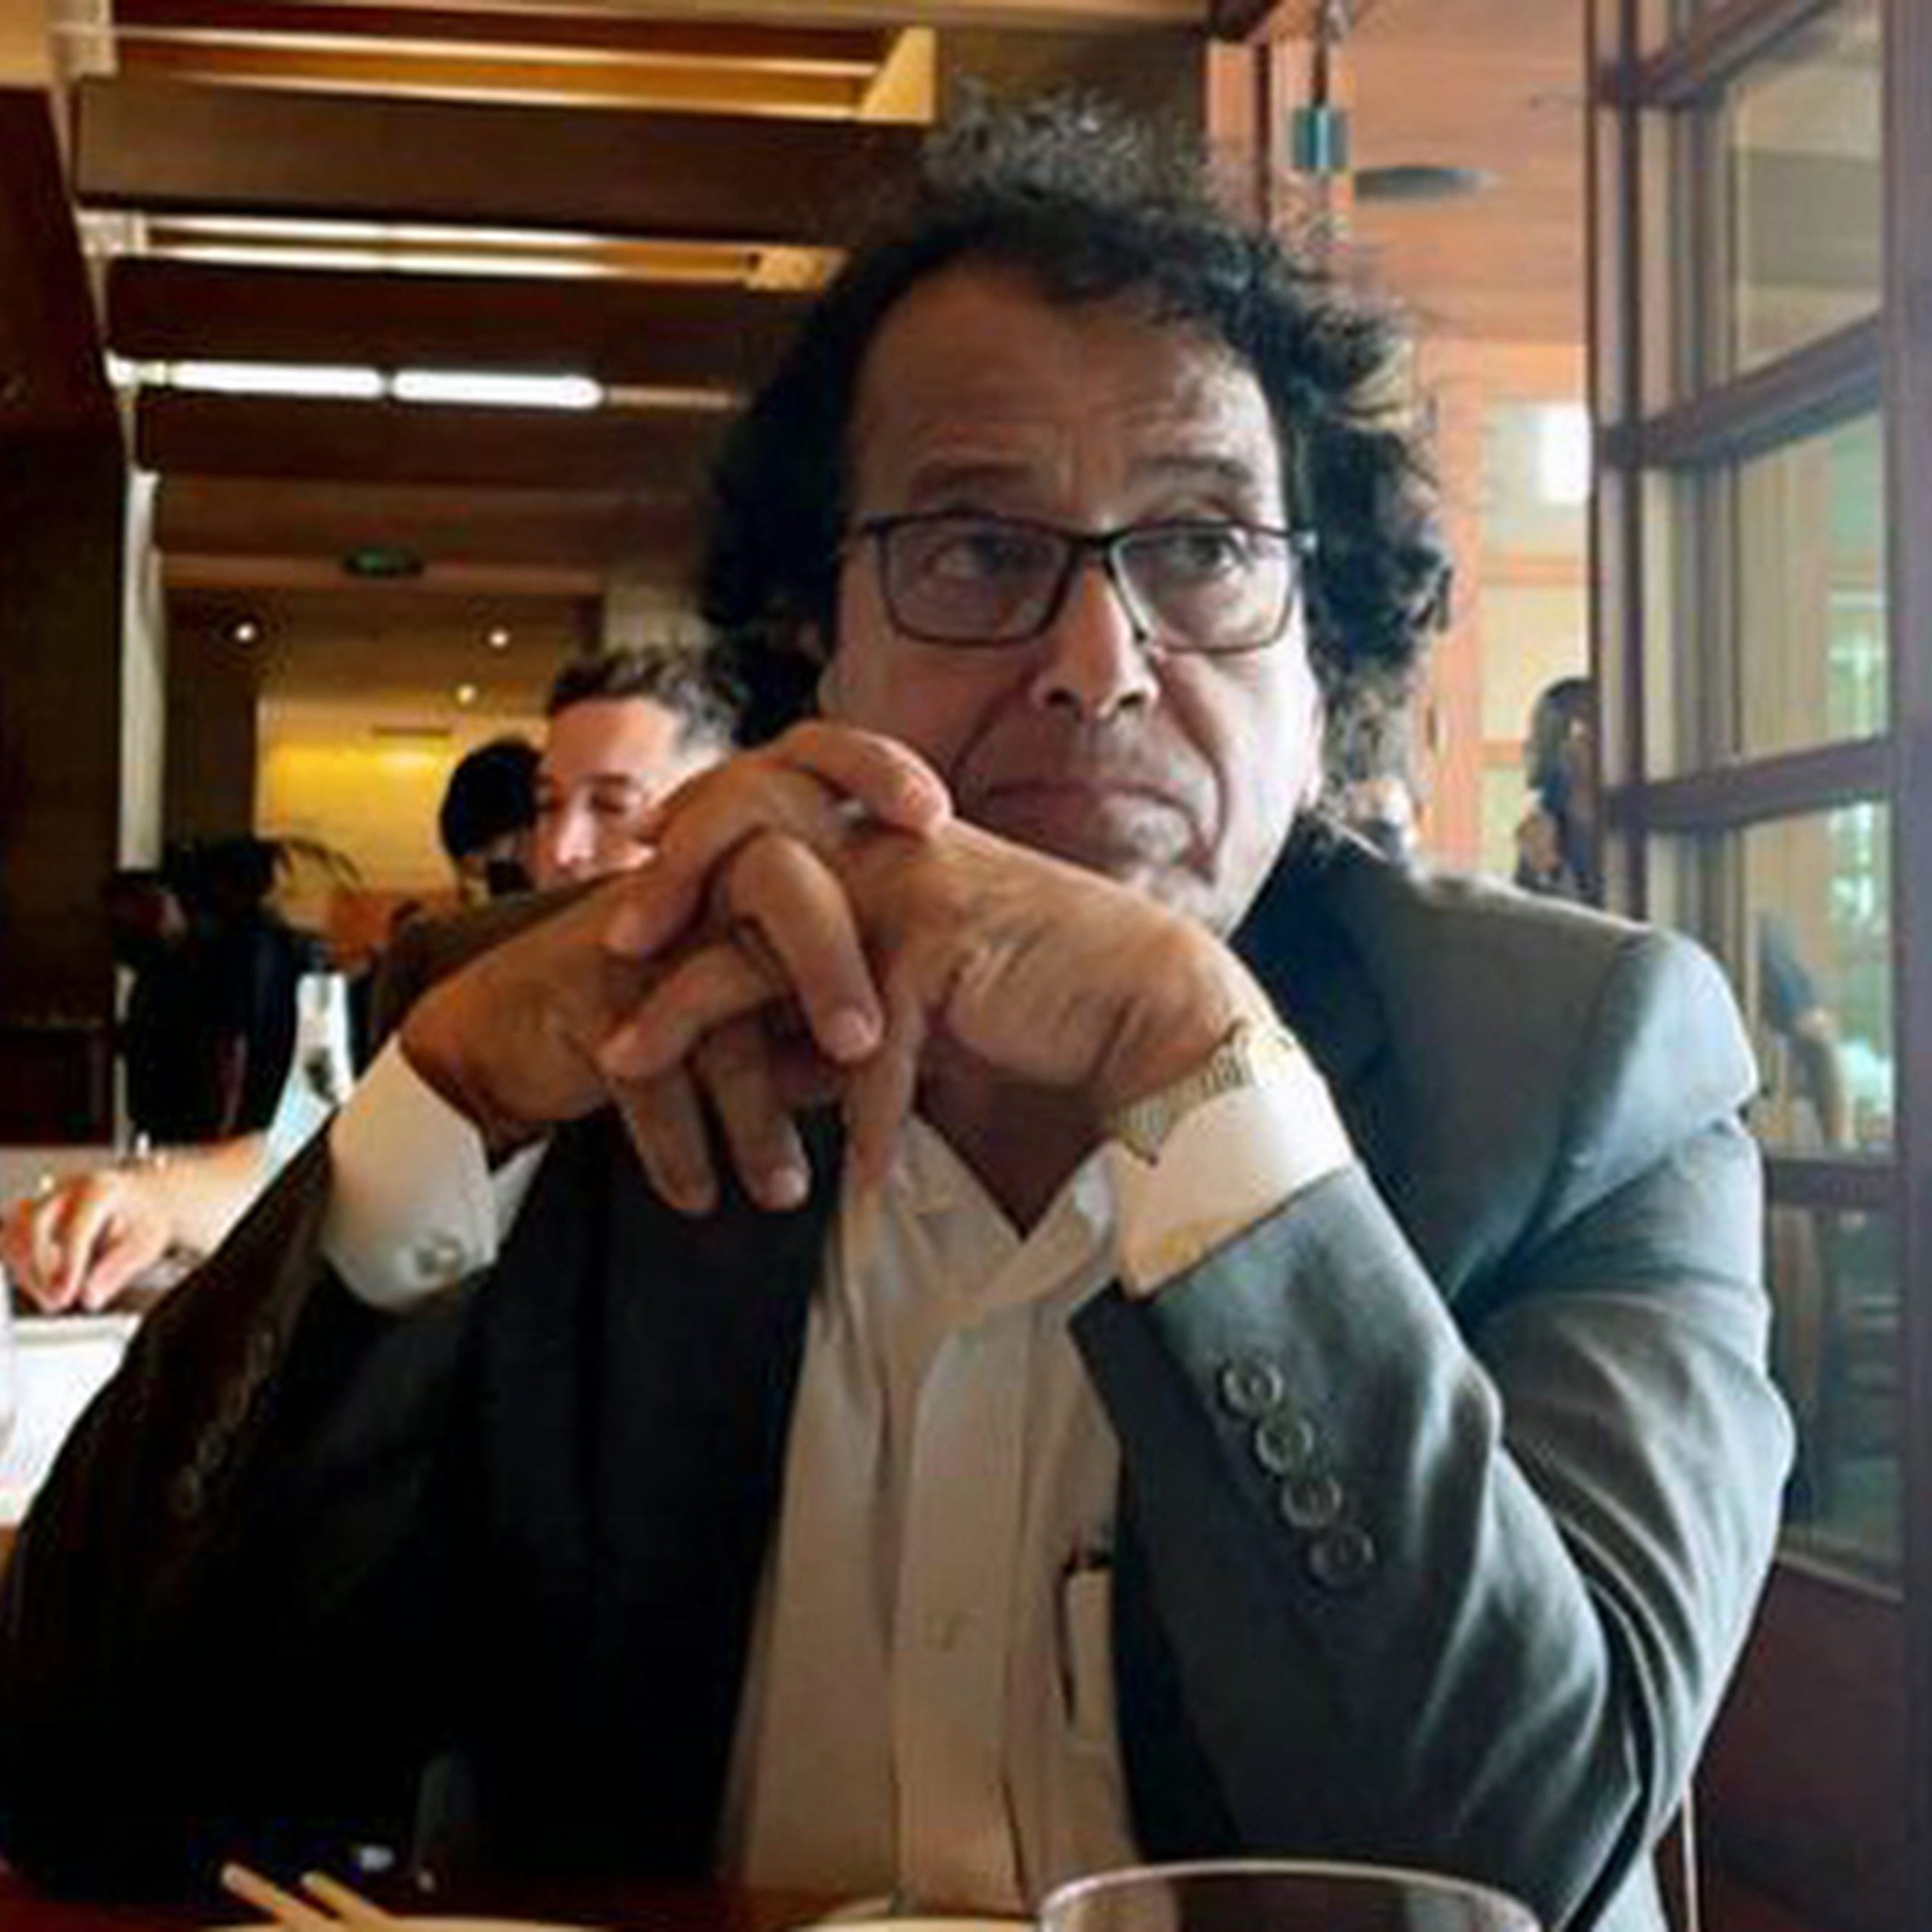 Saad Ibrahim Almadi was photographed in a restaurant August 2021, about three months before he traveled to Saudi Arabia and was detained over tweets critical of the Saudi government. The 72-year-old U.S./Saudi dual citizen was sentenced this month to 16 years in  a Saudi prison. (Ibrahim Almadi via AP)